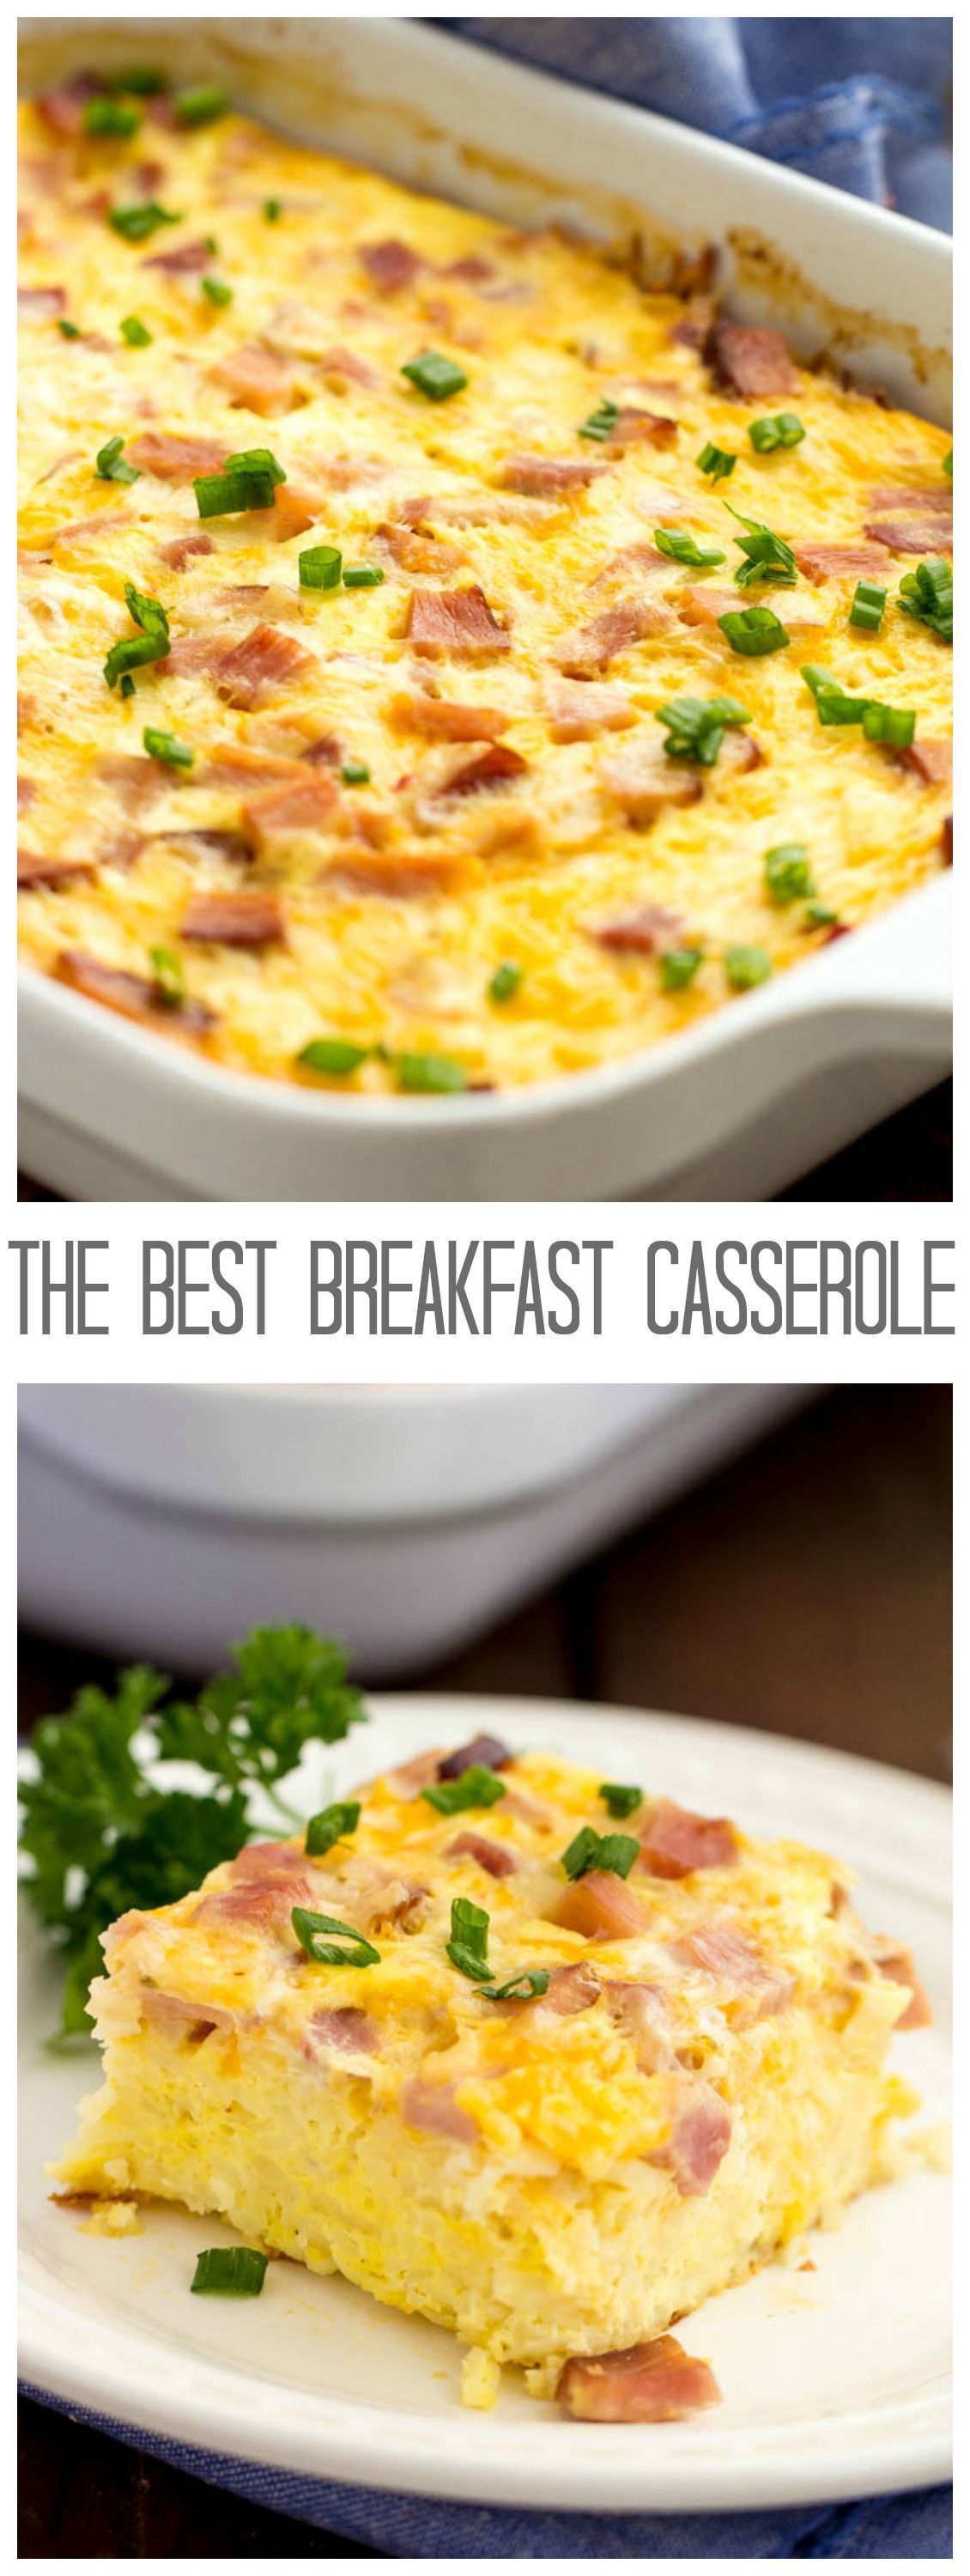 This Breakfast Casserole is the BEST! Hearty and packed with hash browns, eggs, cheese and ham!